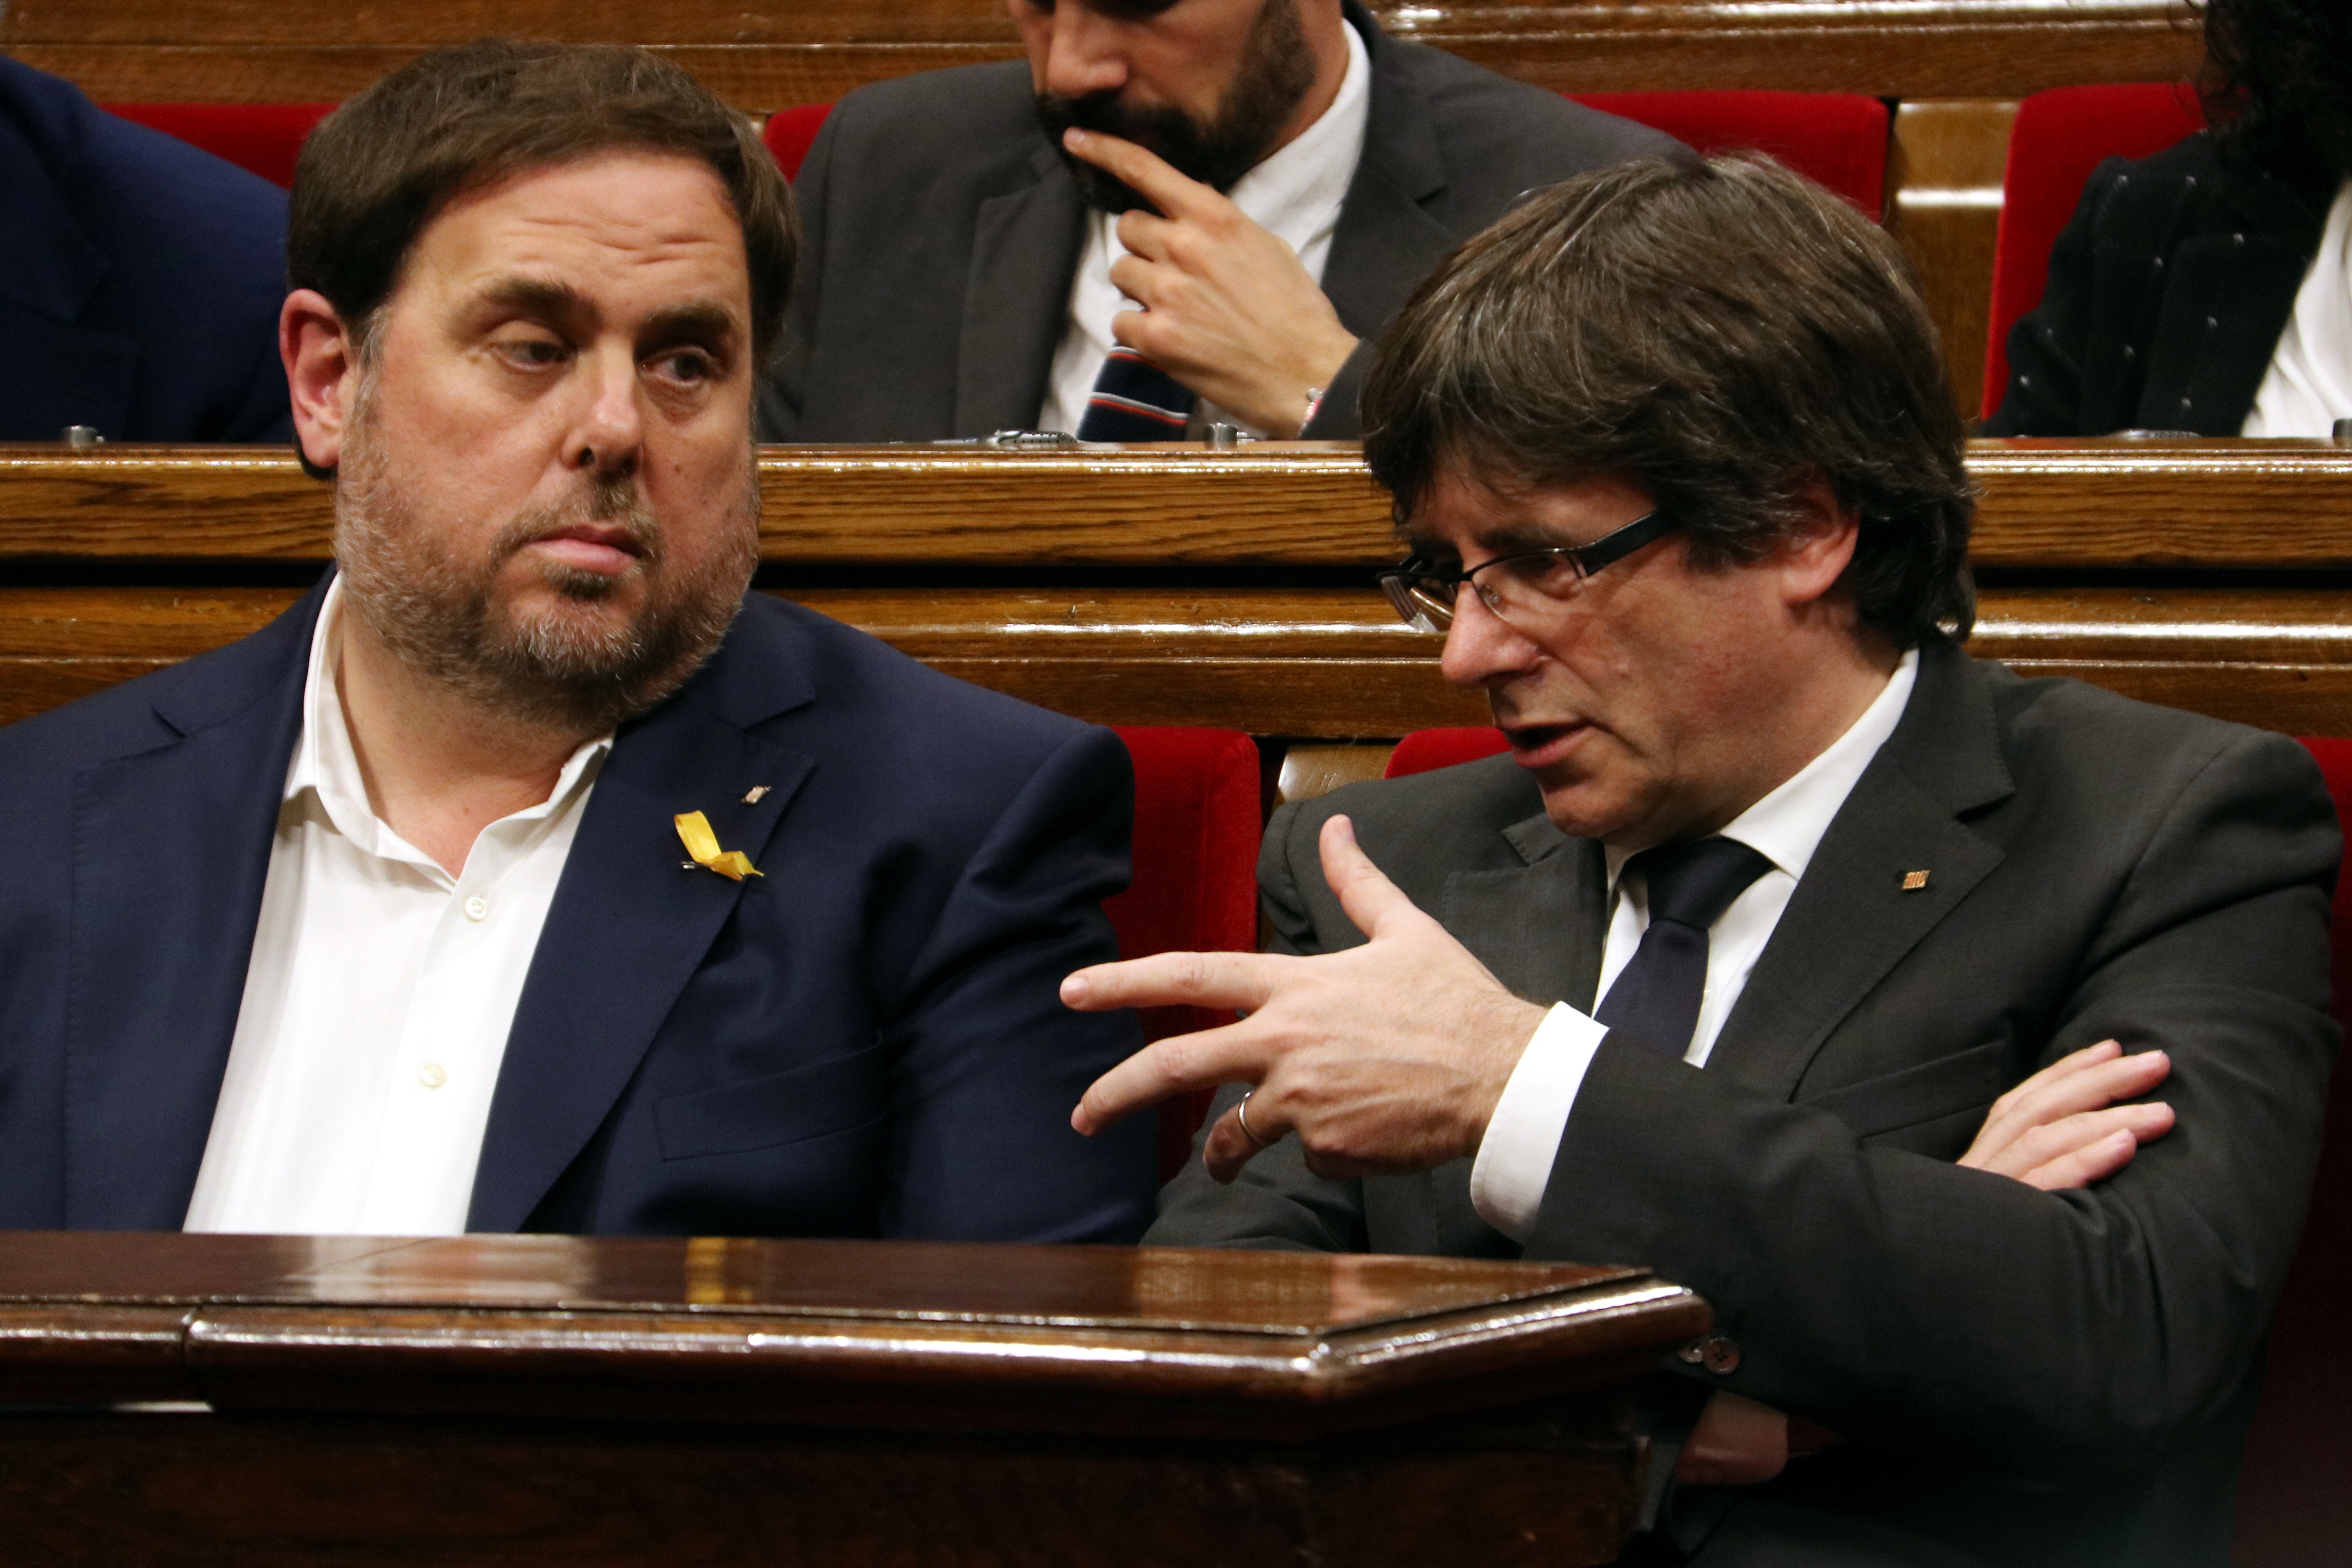 Catalan vice president Oriol Junqueras and president Carles Puigdemont, now both deposed by the Spanish government, with the former in precautionary jail and the second in exile in Belgium on October 26 2017 in the Catalan parliament (by Pere Francesch)